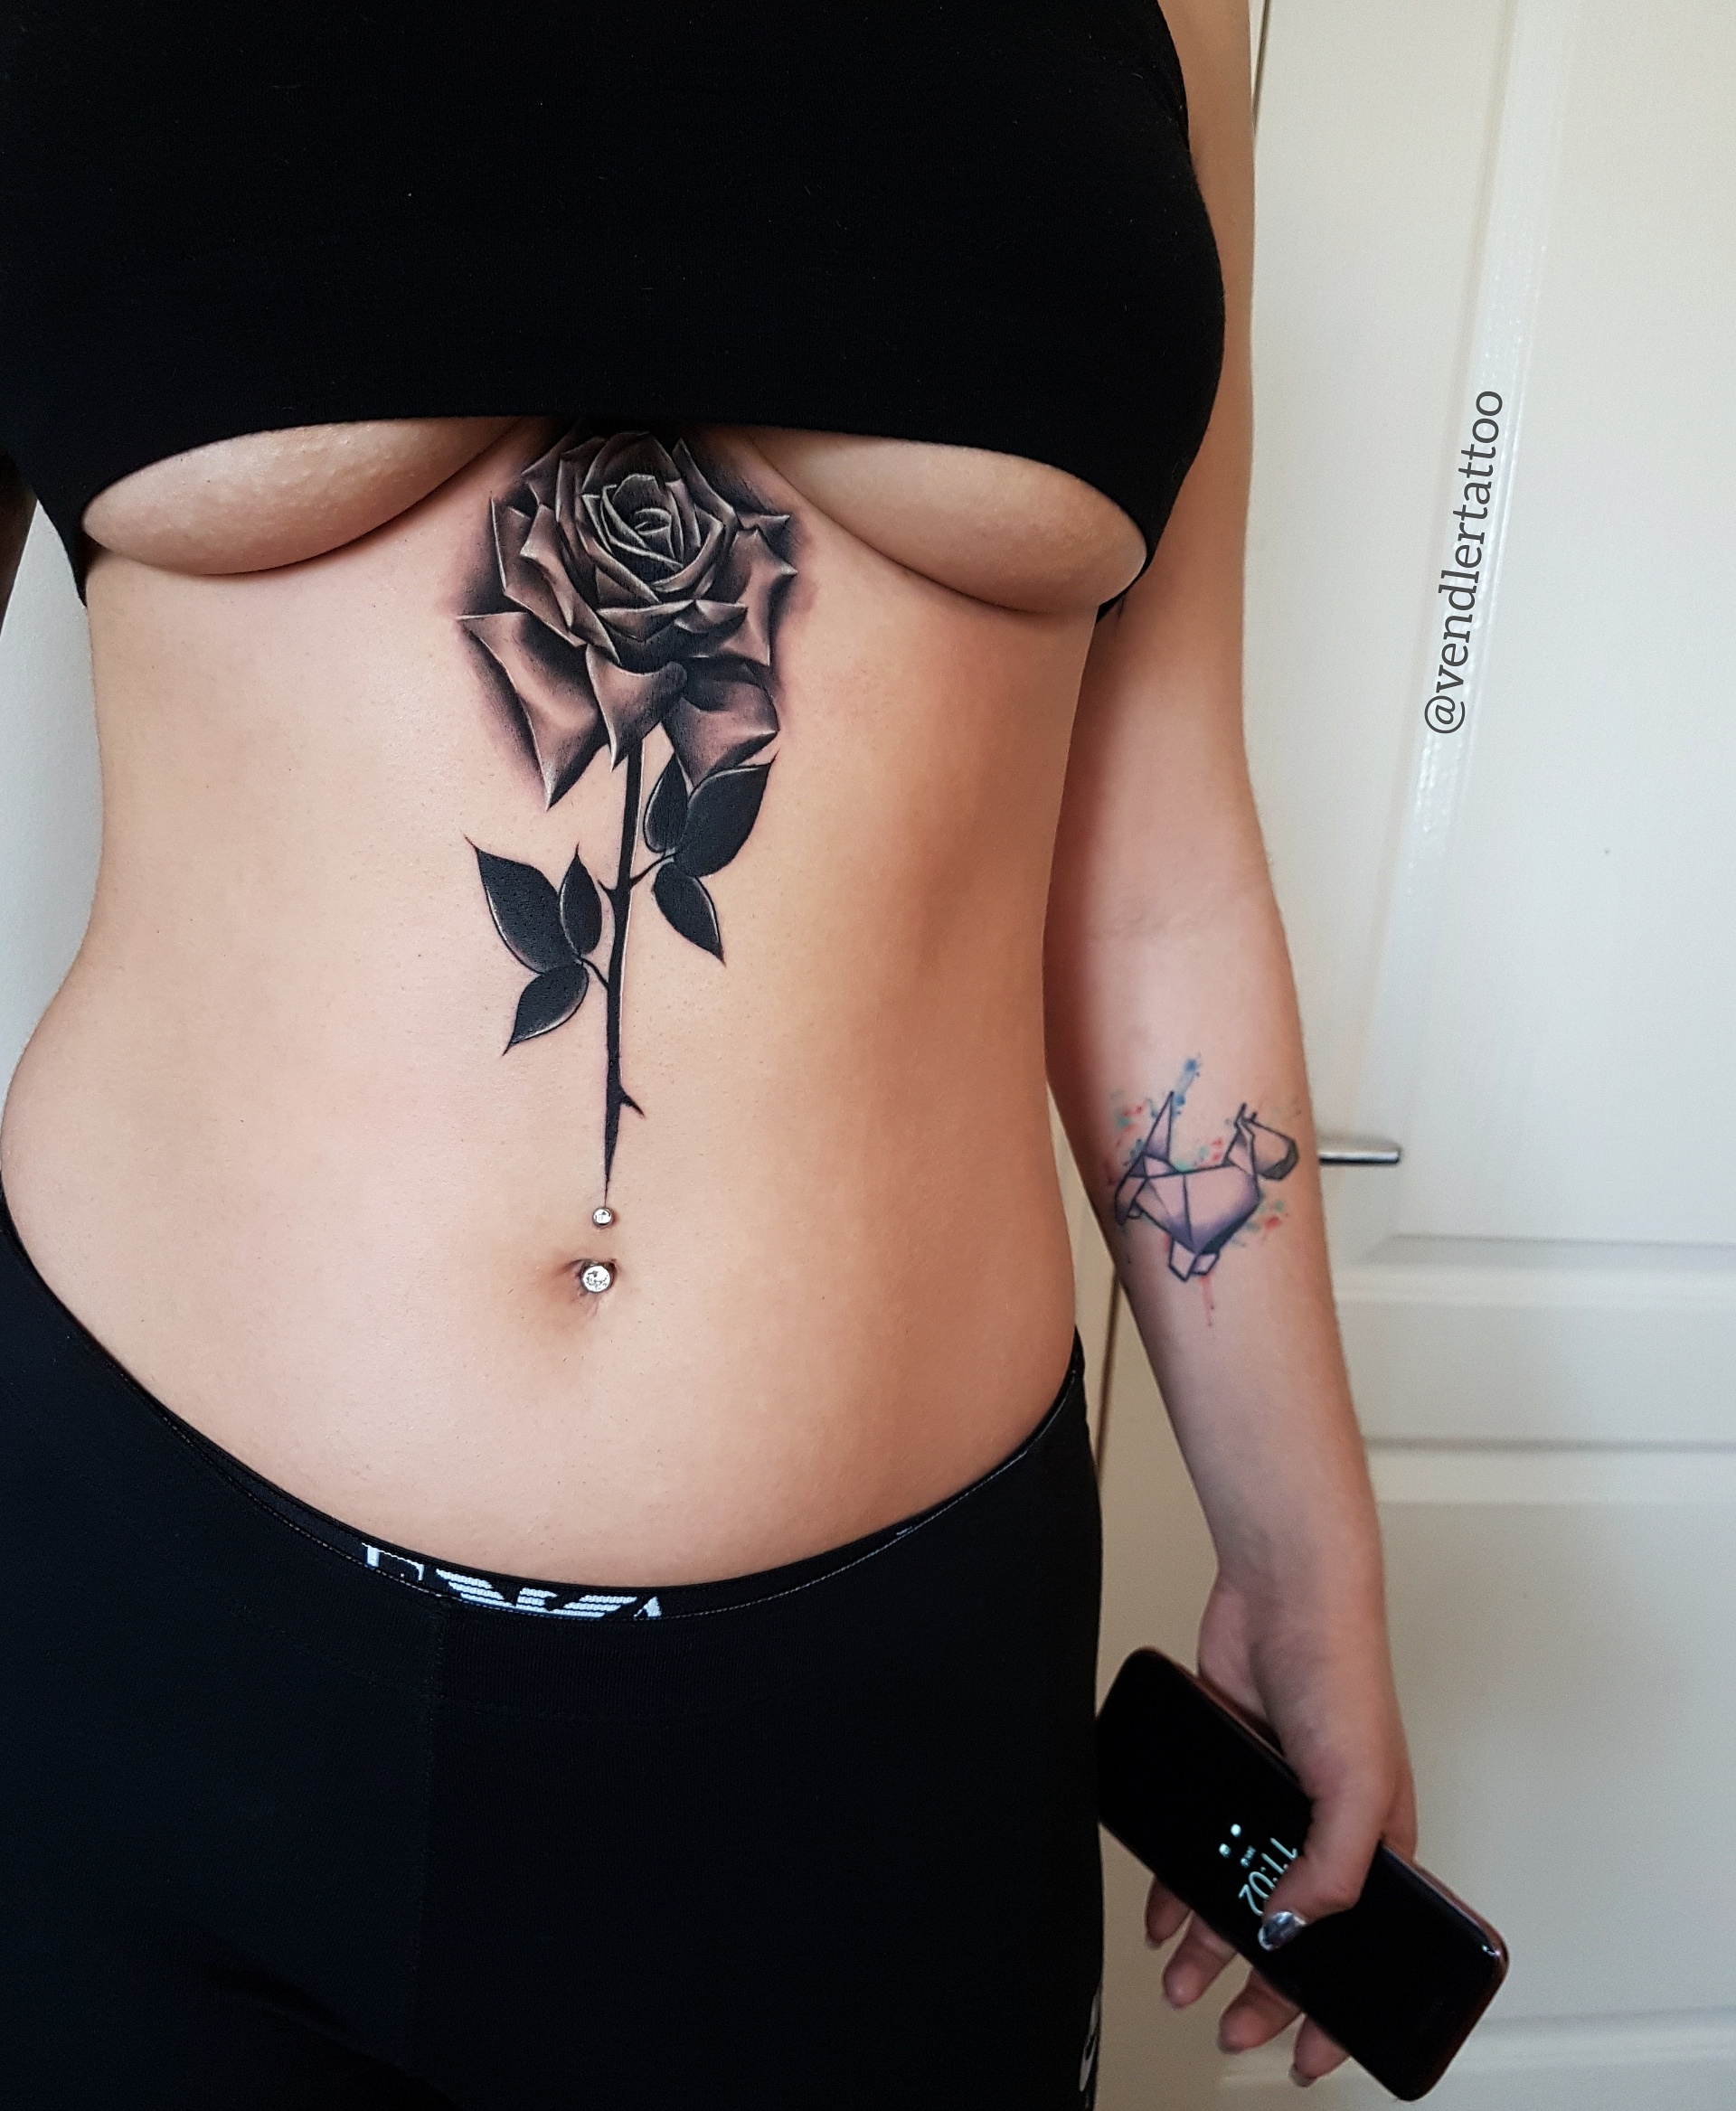 Amazing Chest Tattoos Approved Artists intended for dimensions 1920 X 2335